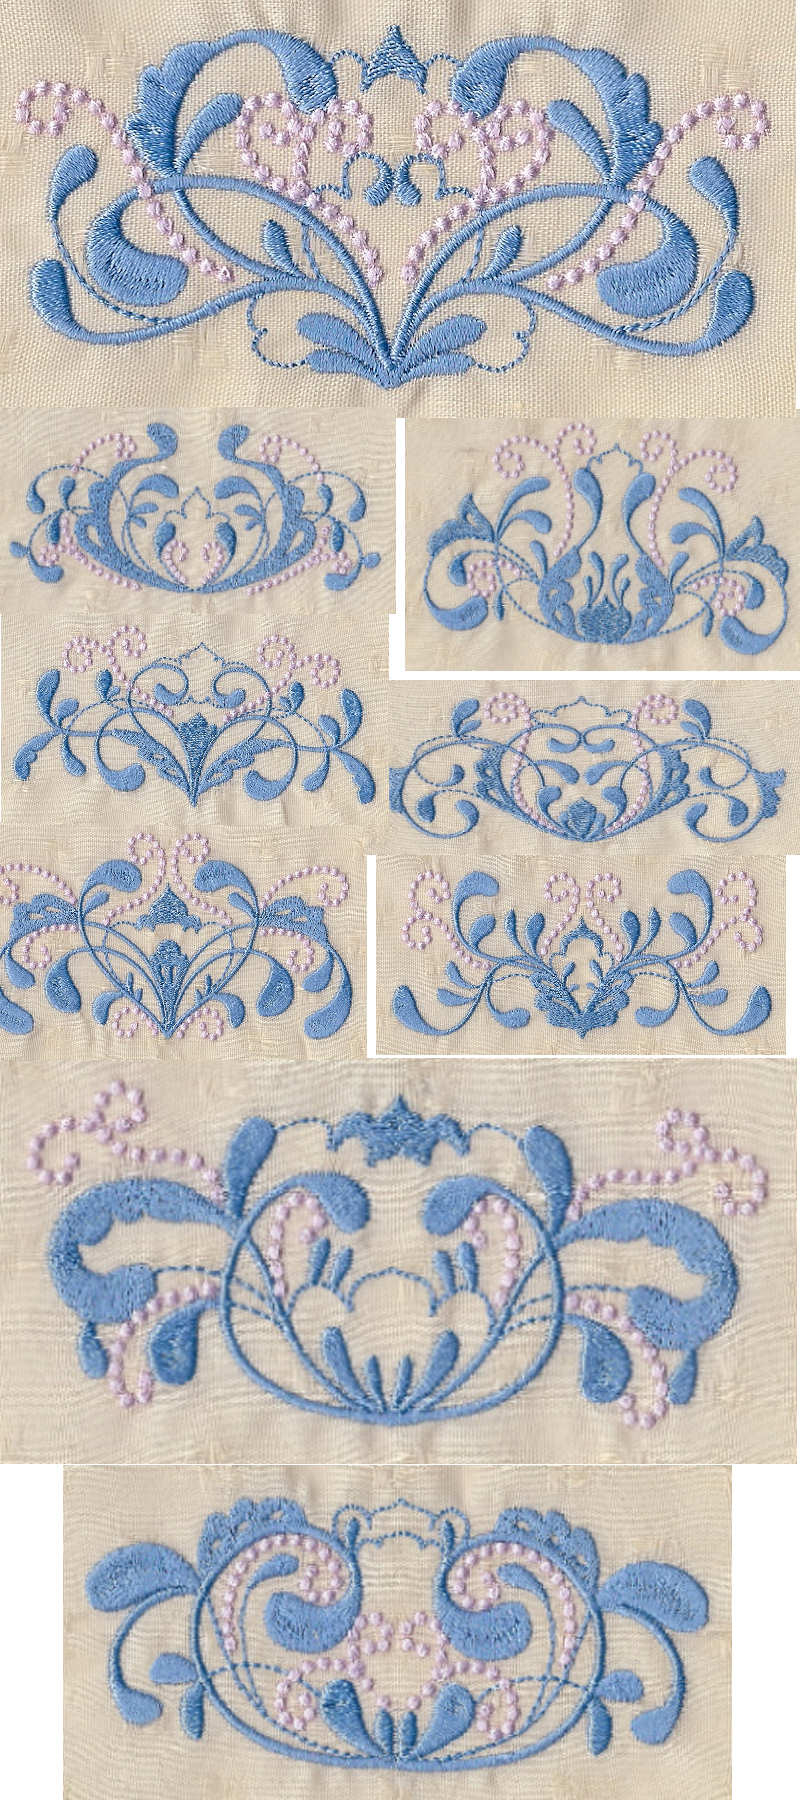 Art Deco Embroidery Patterns Libis Embroidery Art Deco